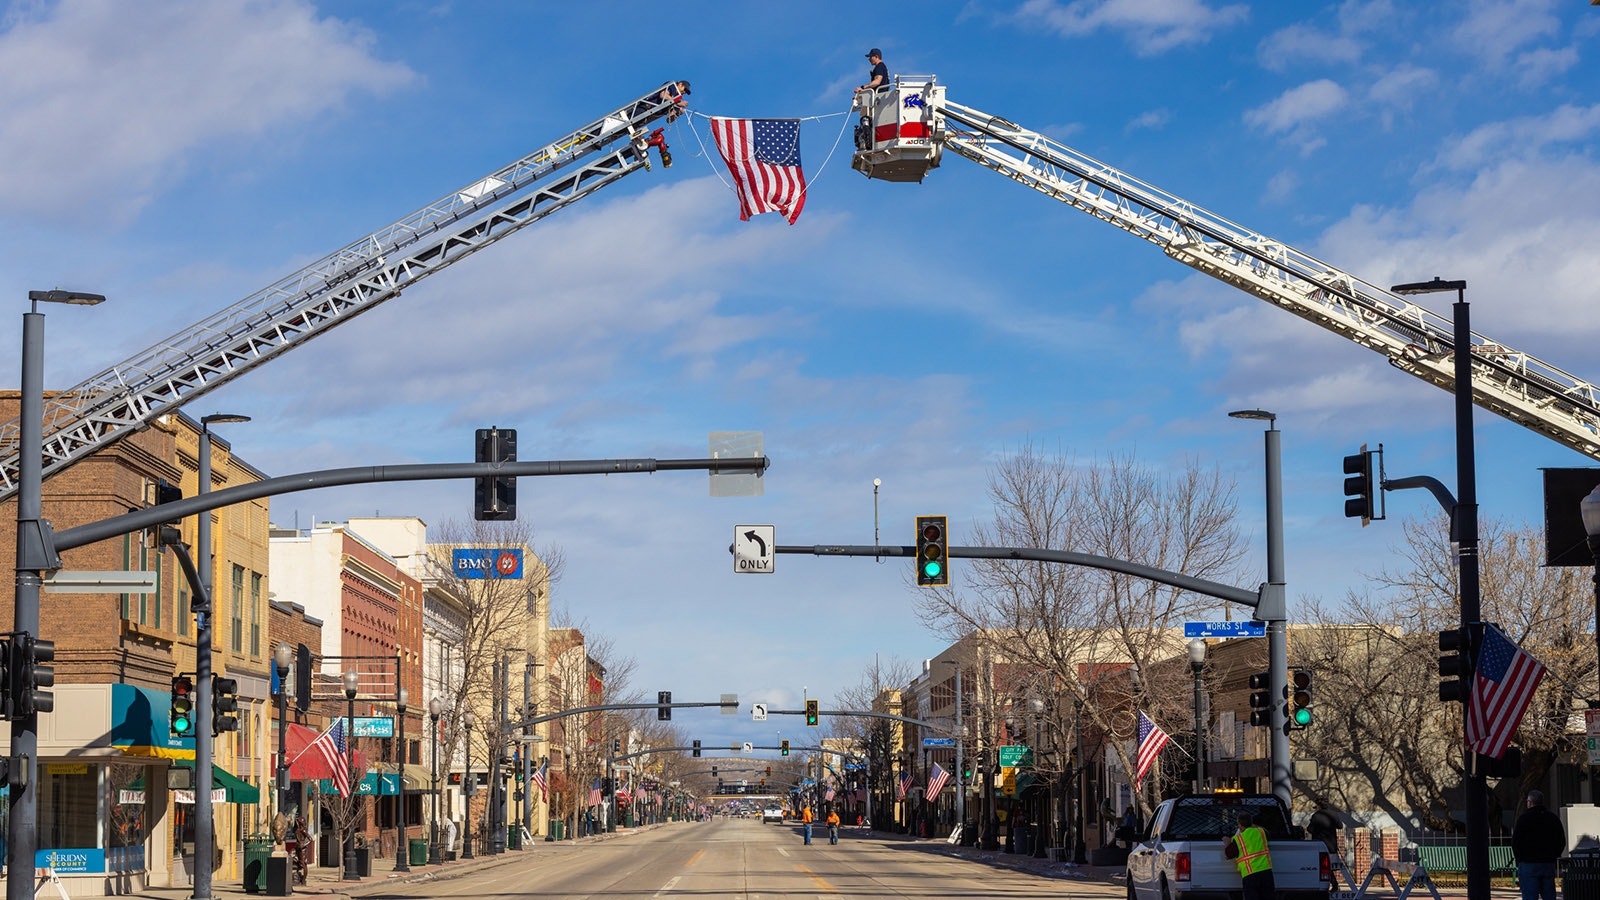 Flags are hung along the procession route ahead of Friday's memorial in Sheridan for police Sgt. Nevada Krinkee, who was shot and killed in the line of duty on Feb. 13.